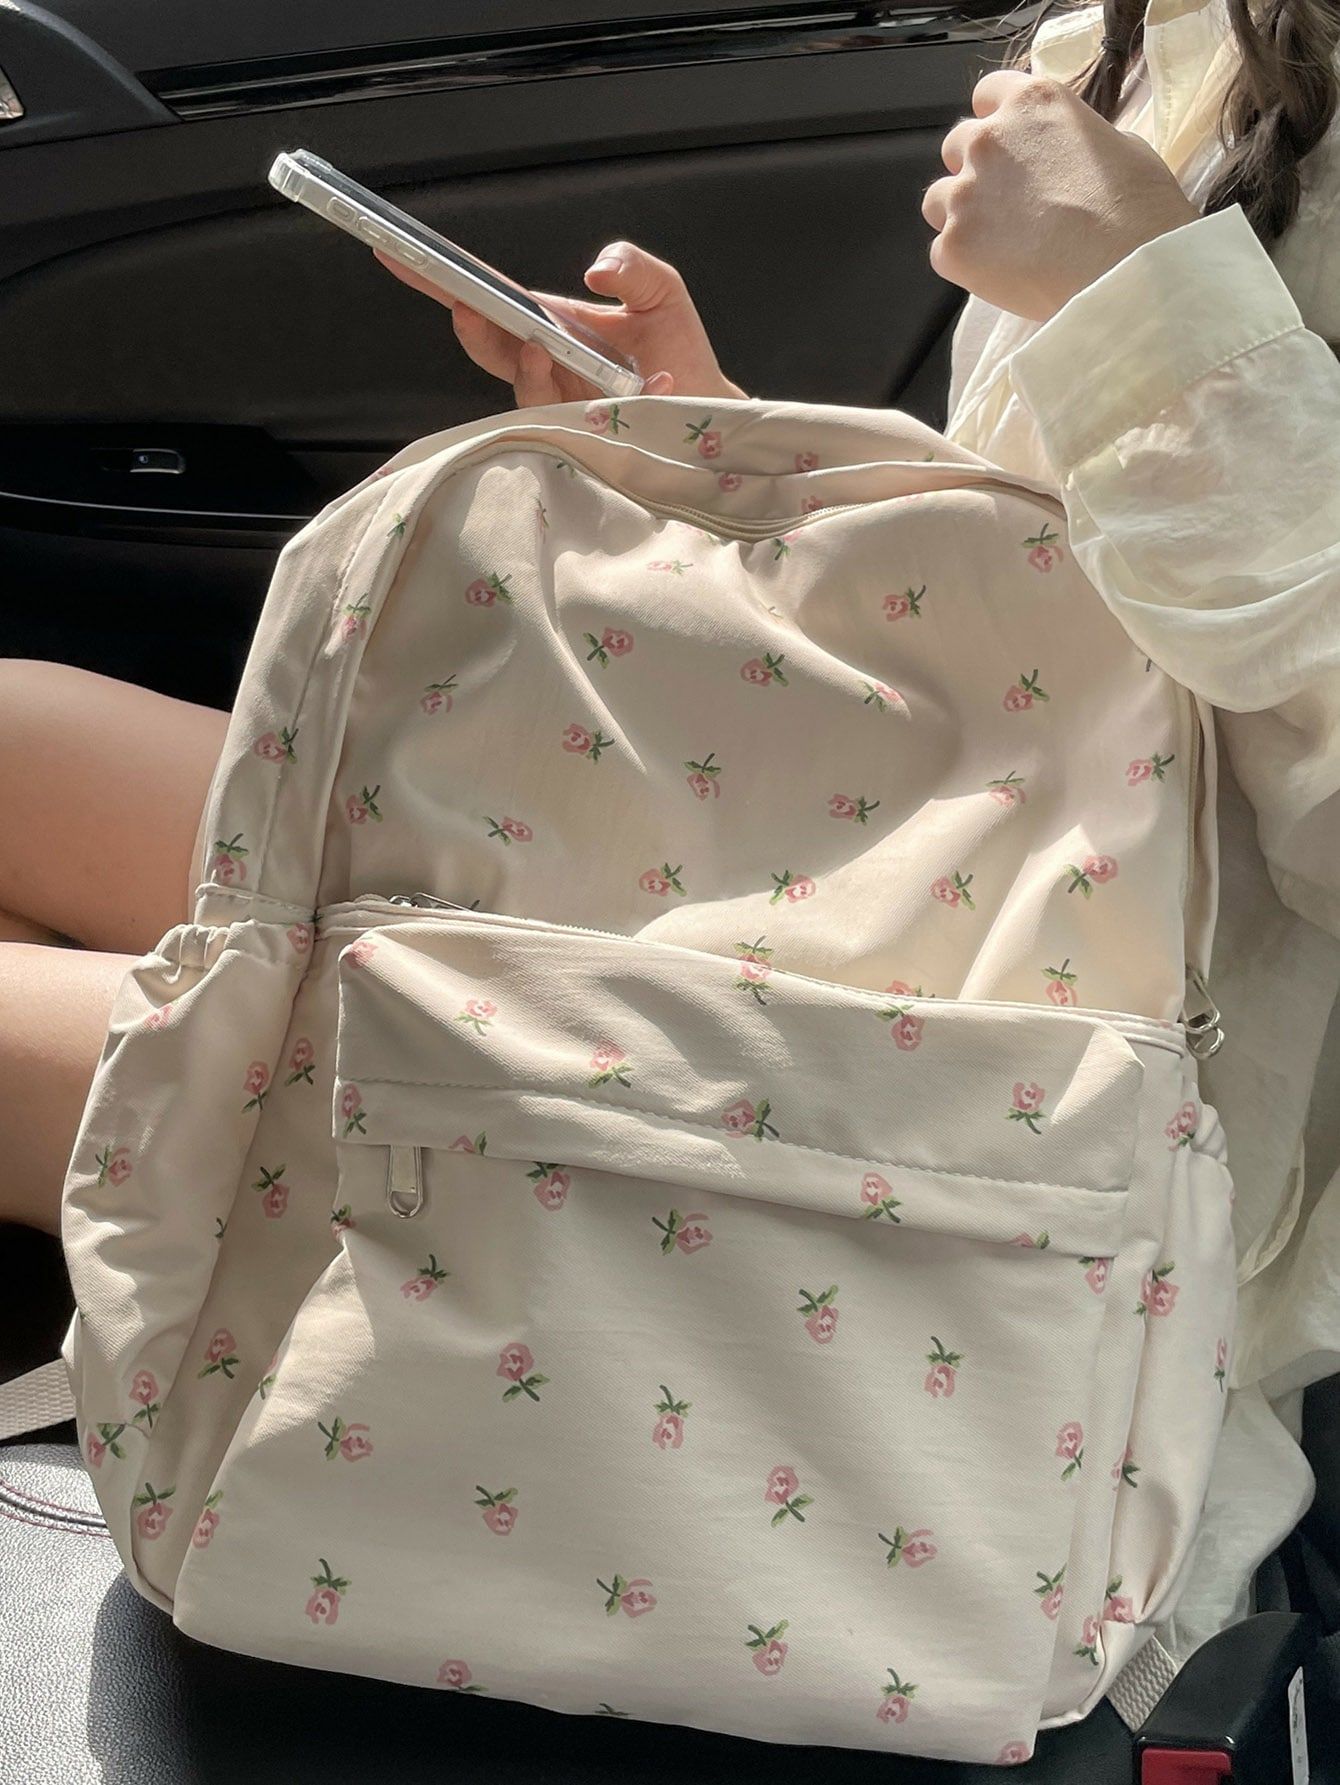 How to pick the best school bag for your child